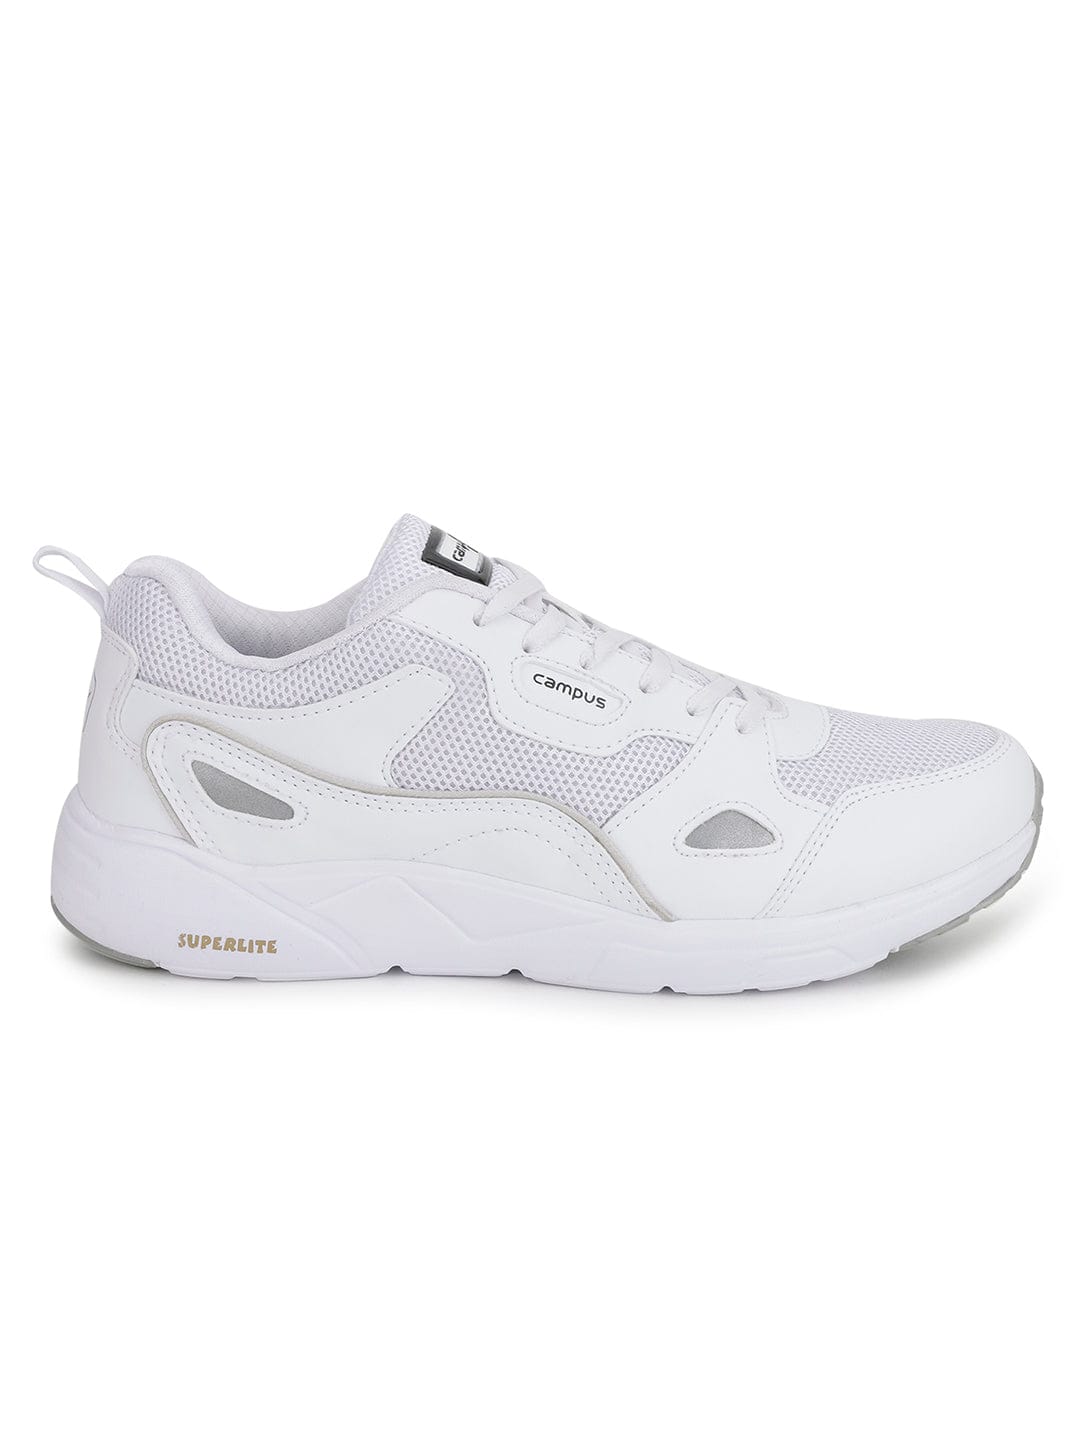 Buy Running Shoes For Men: Wisdom-5G-681Wht-Blk-Sil1499 | Campus Shoes